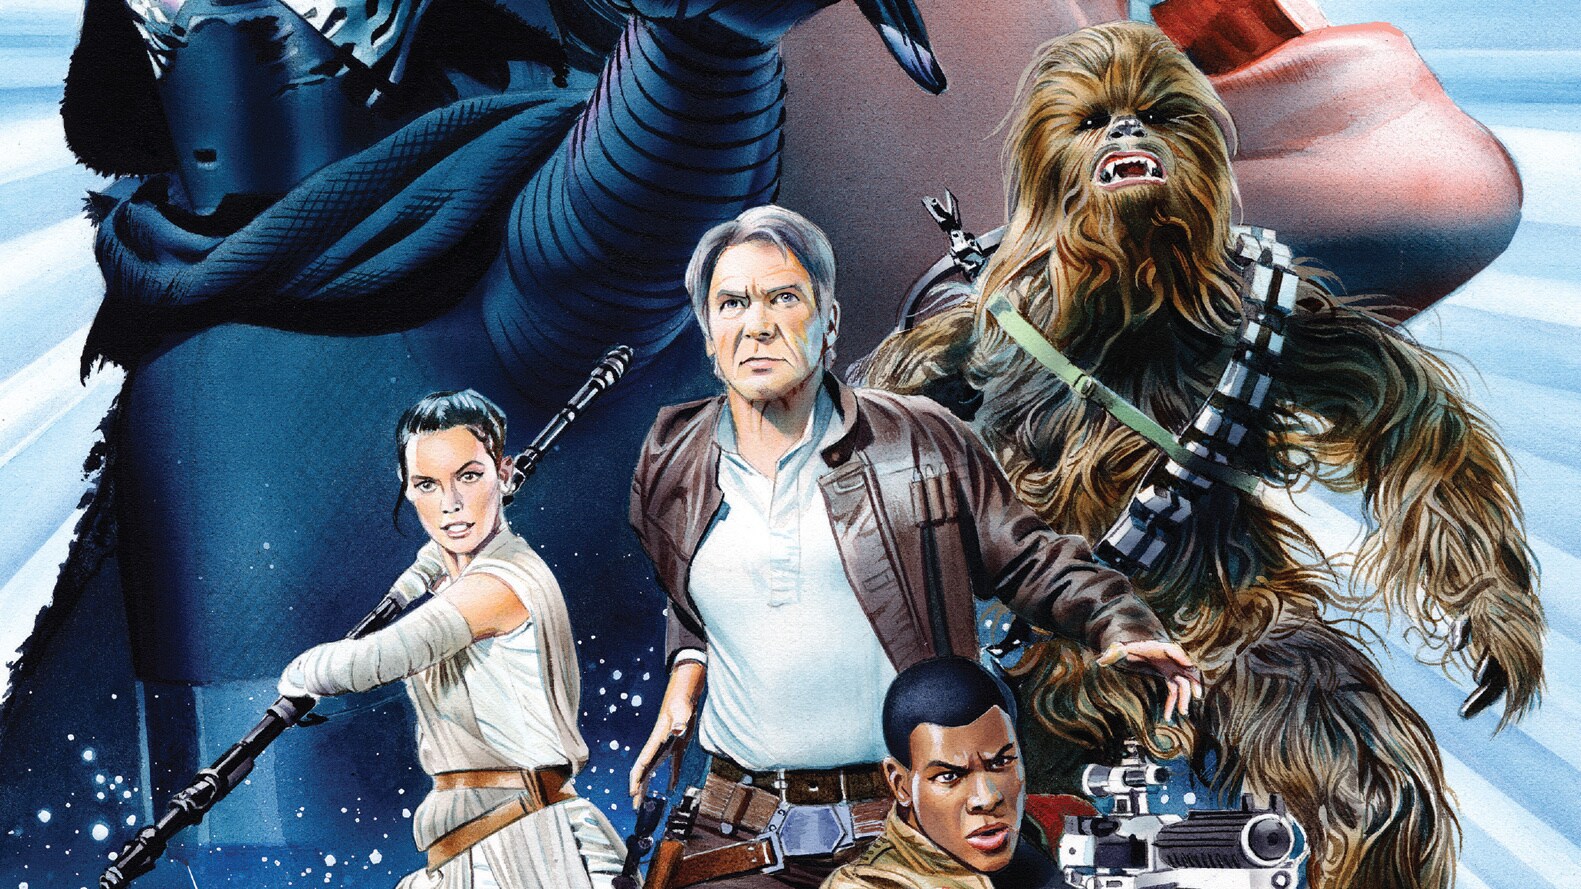 Comic Book Galaxy: Highlights from Star Wars: The Force Awakens #2 and More